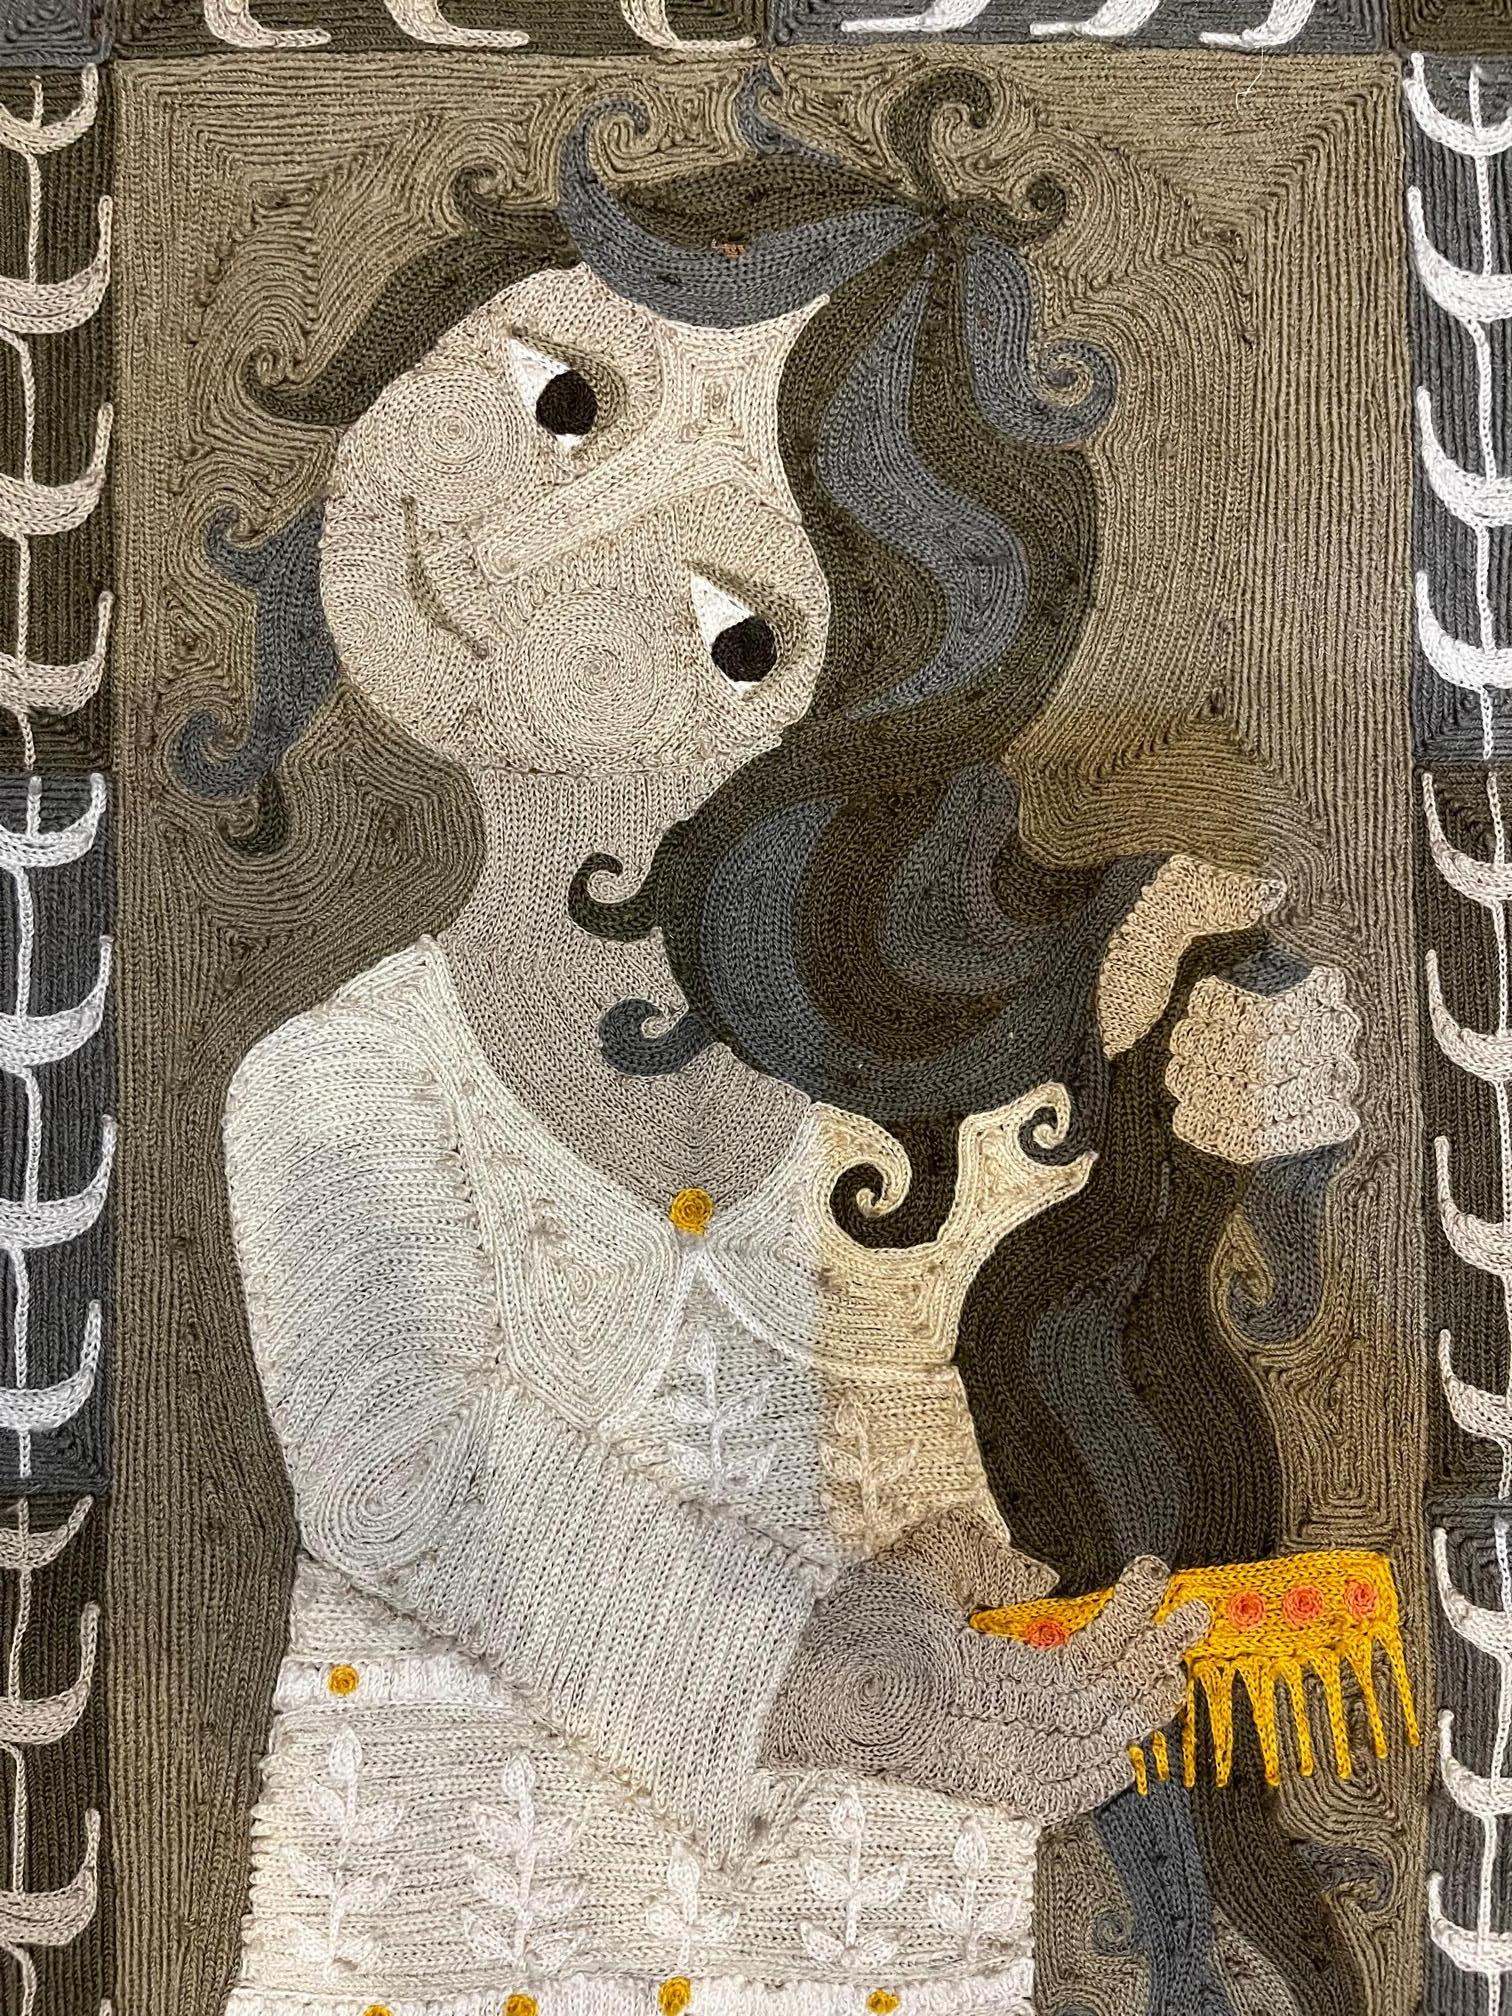 Elisabeth Baillon, Tapestry,
The girl with the comb
signed in the right corner,
cotton,
circa 1960, France.
Good condition.
Height 62 cm, width 31 cm, depth 1 mm.